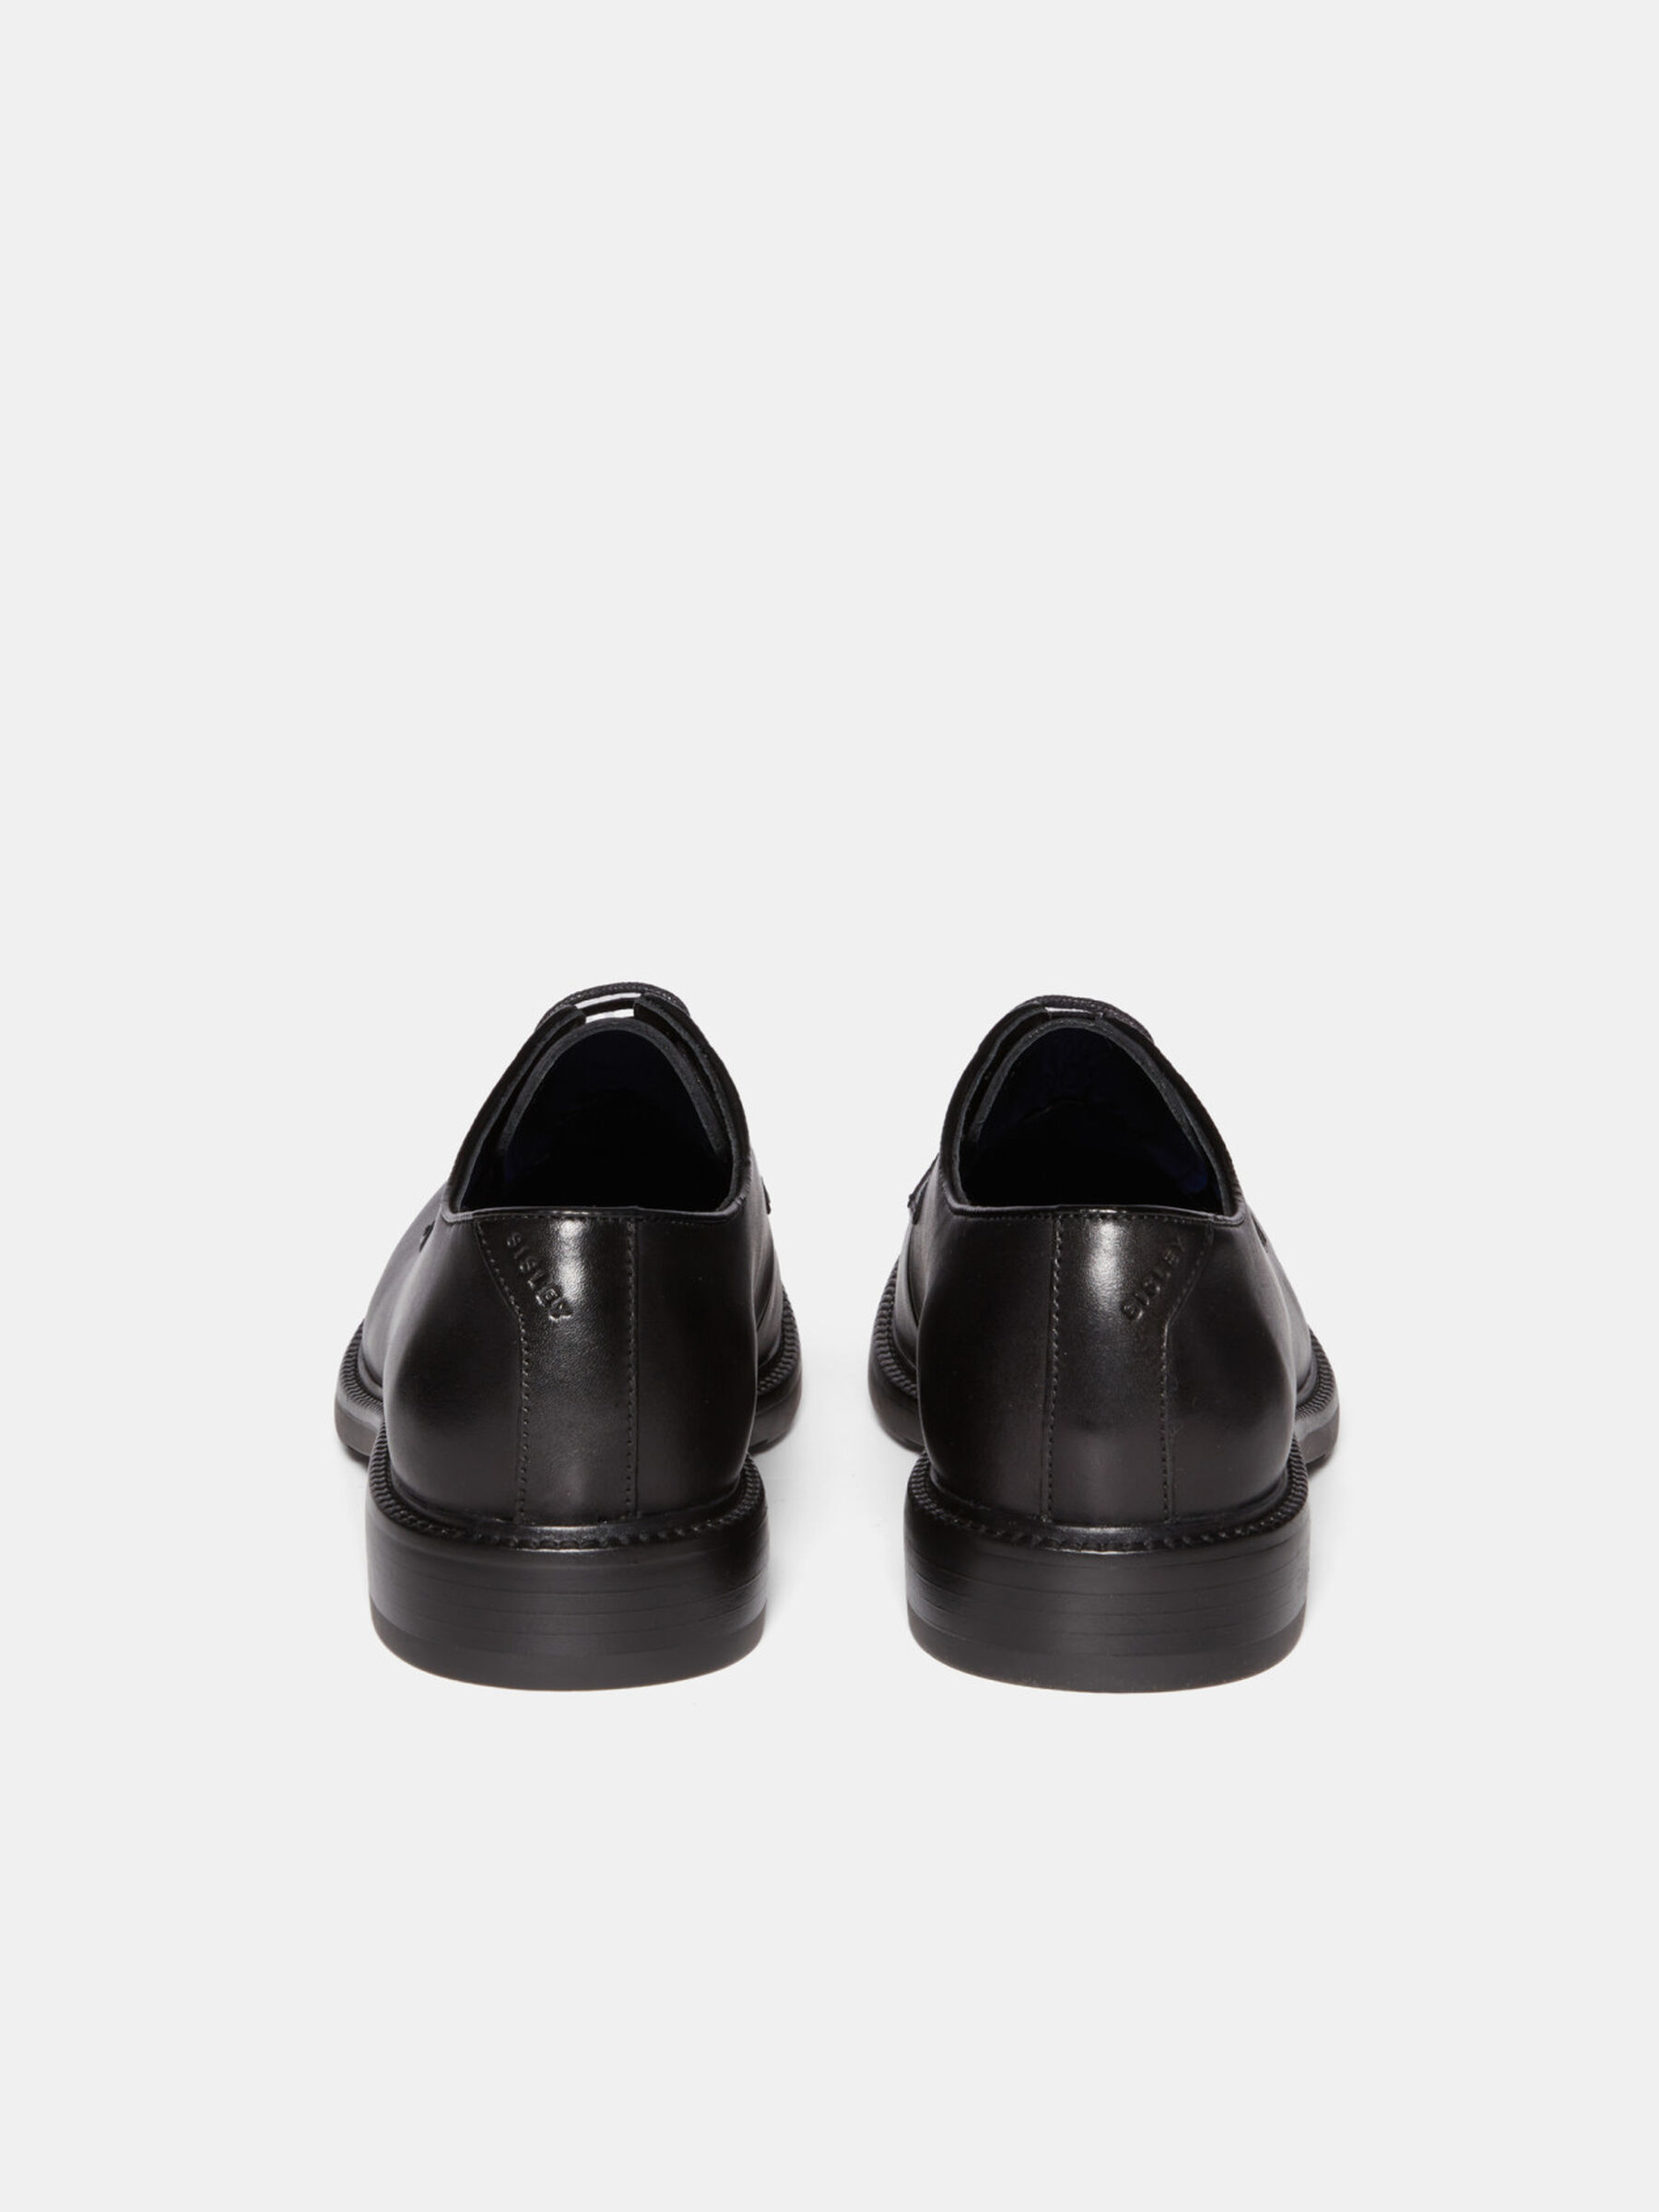 100% leather derby shoes, Black - Sisley